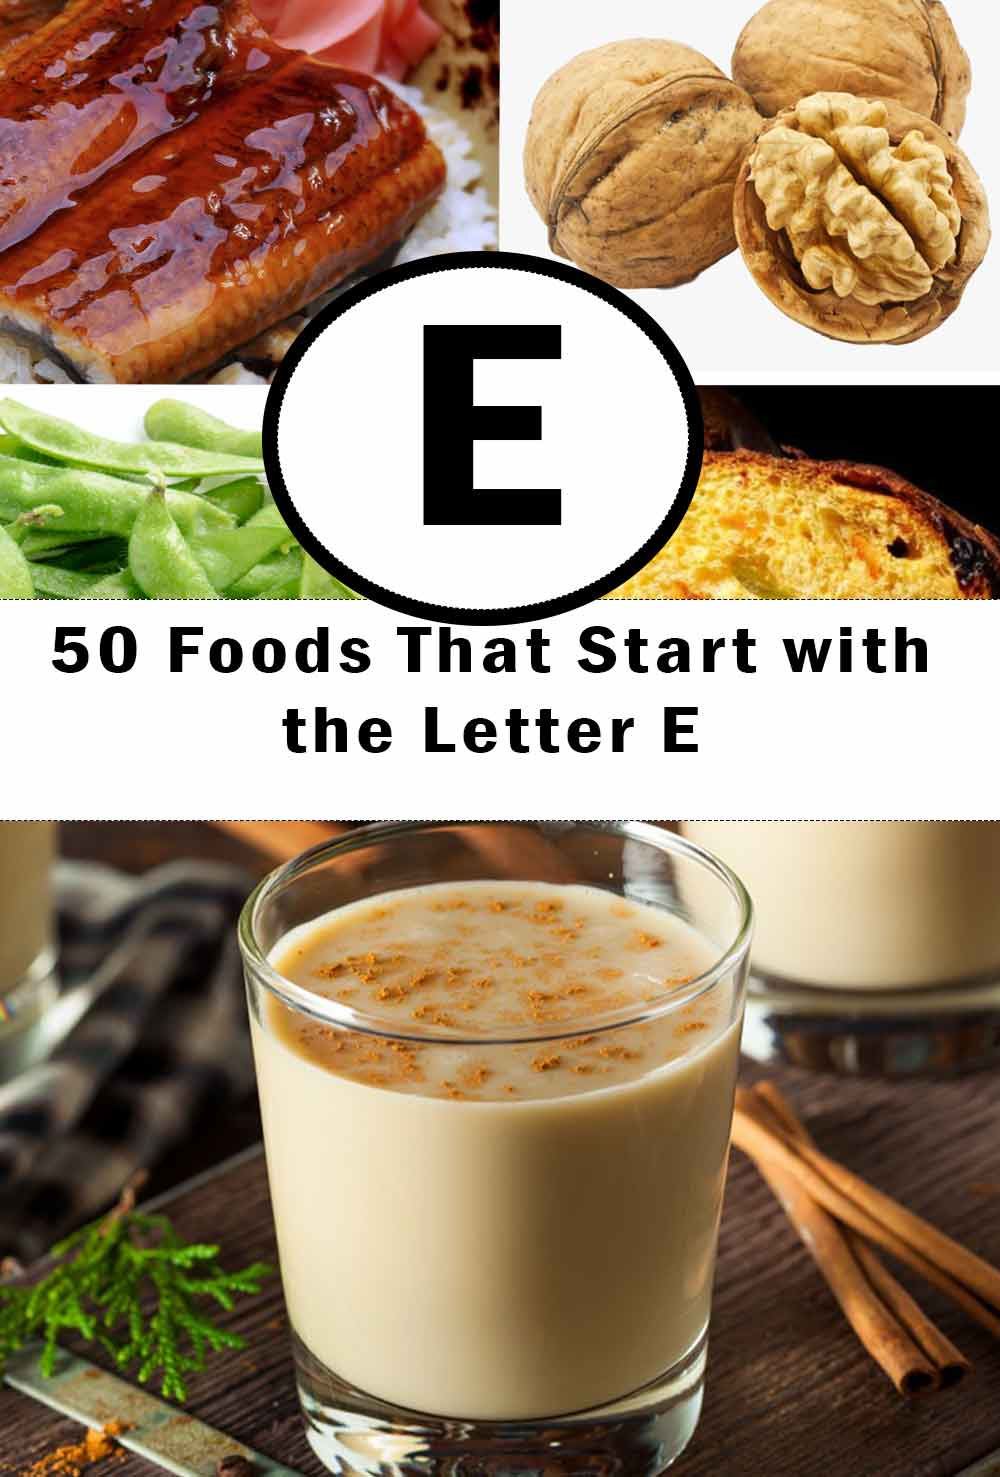 foods-that-start-with-letter-e